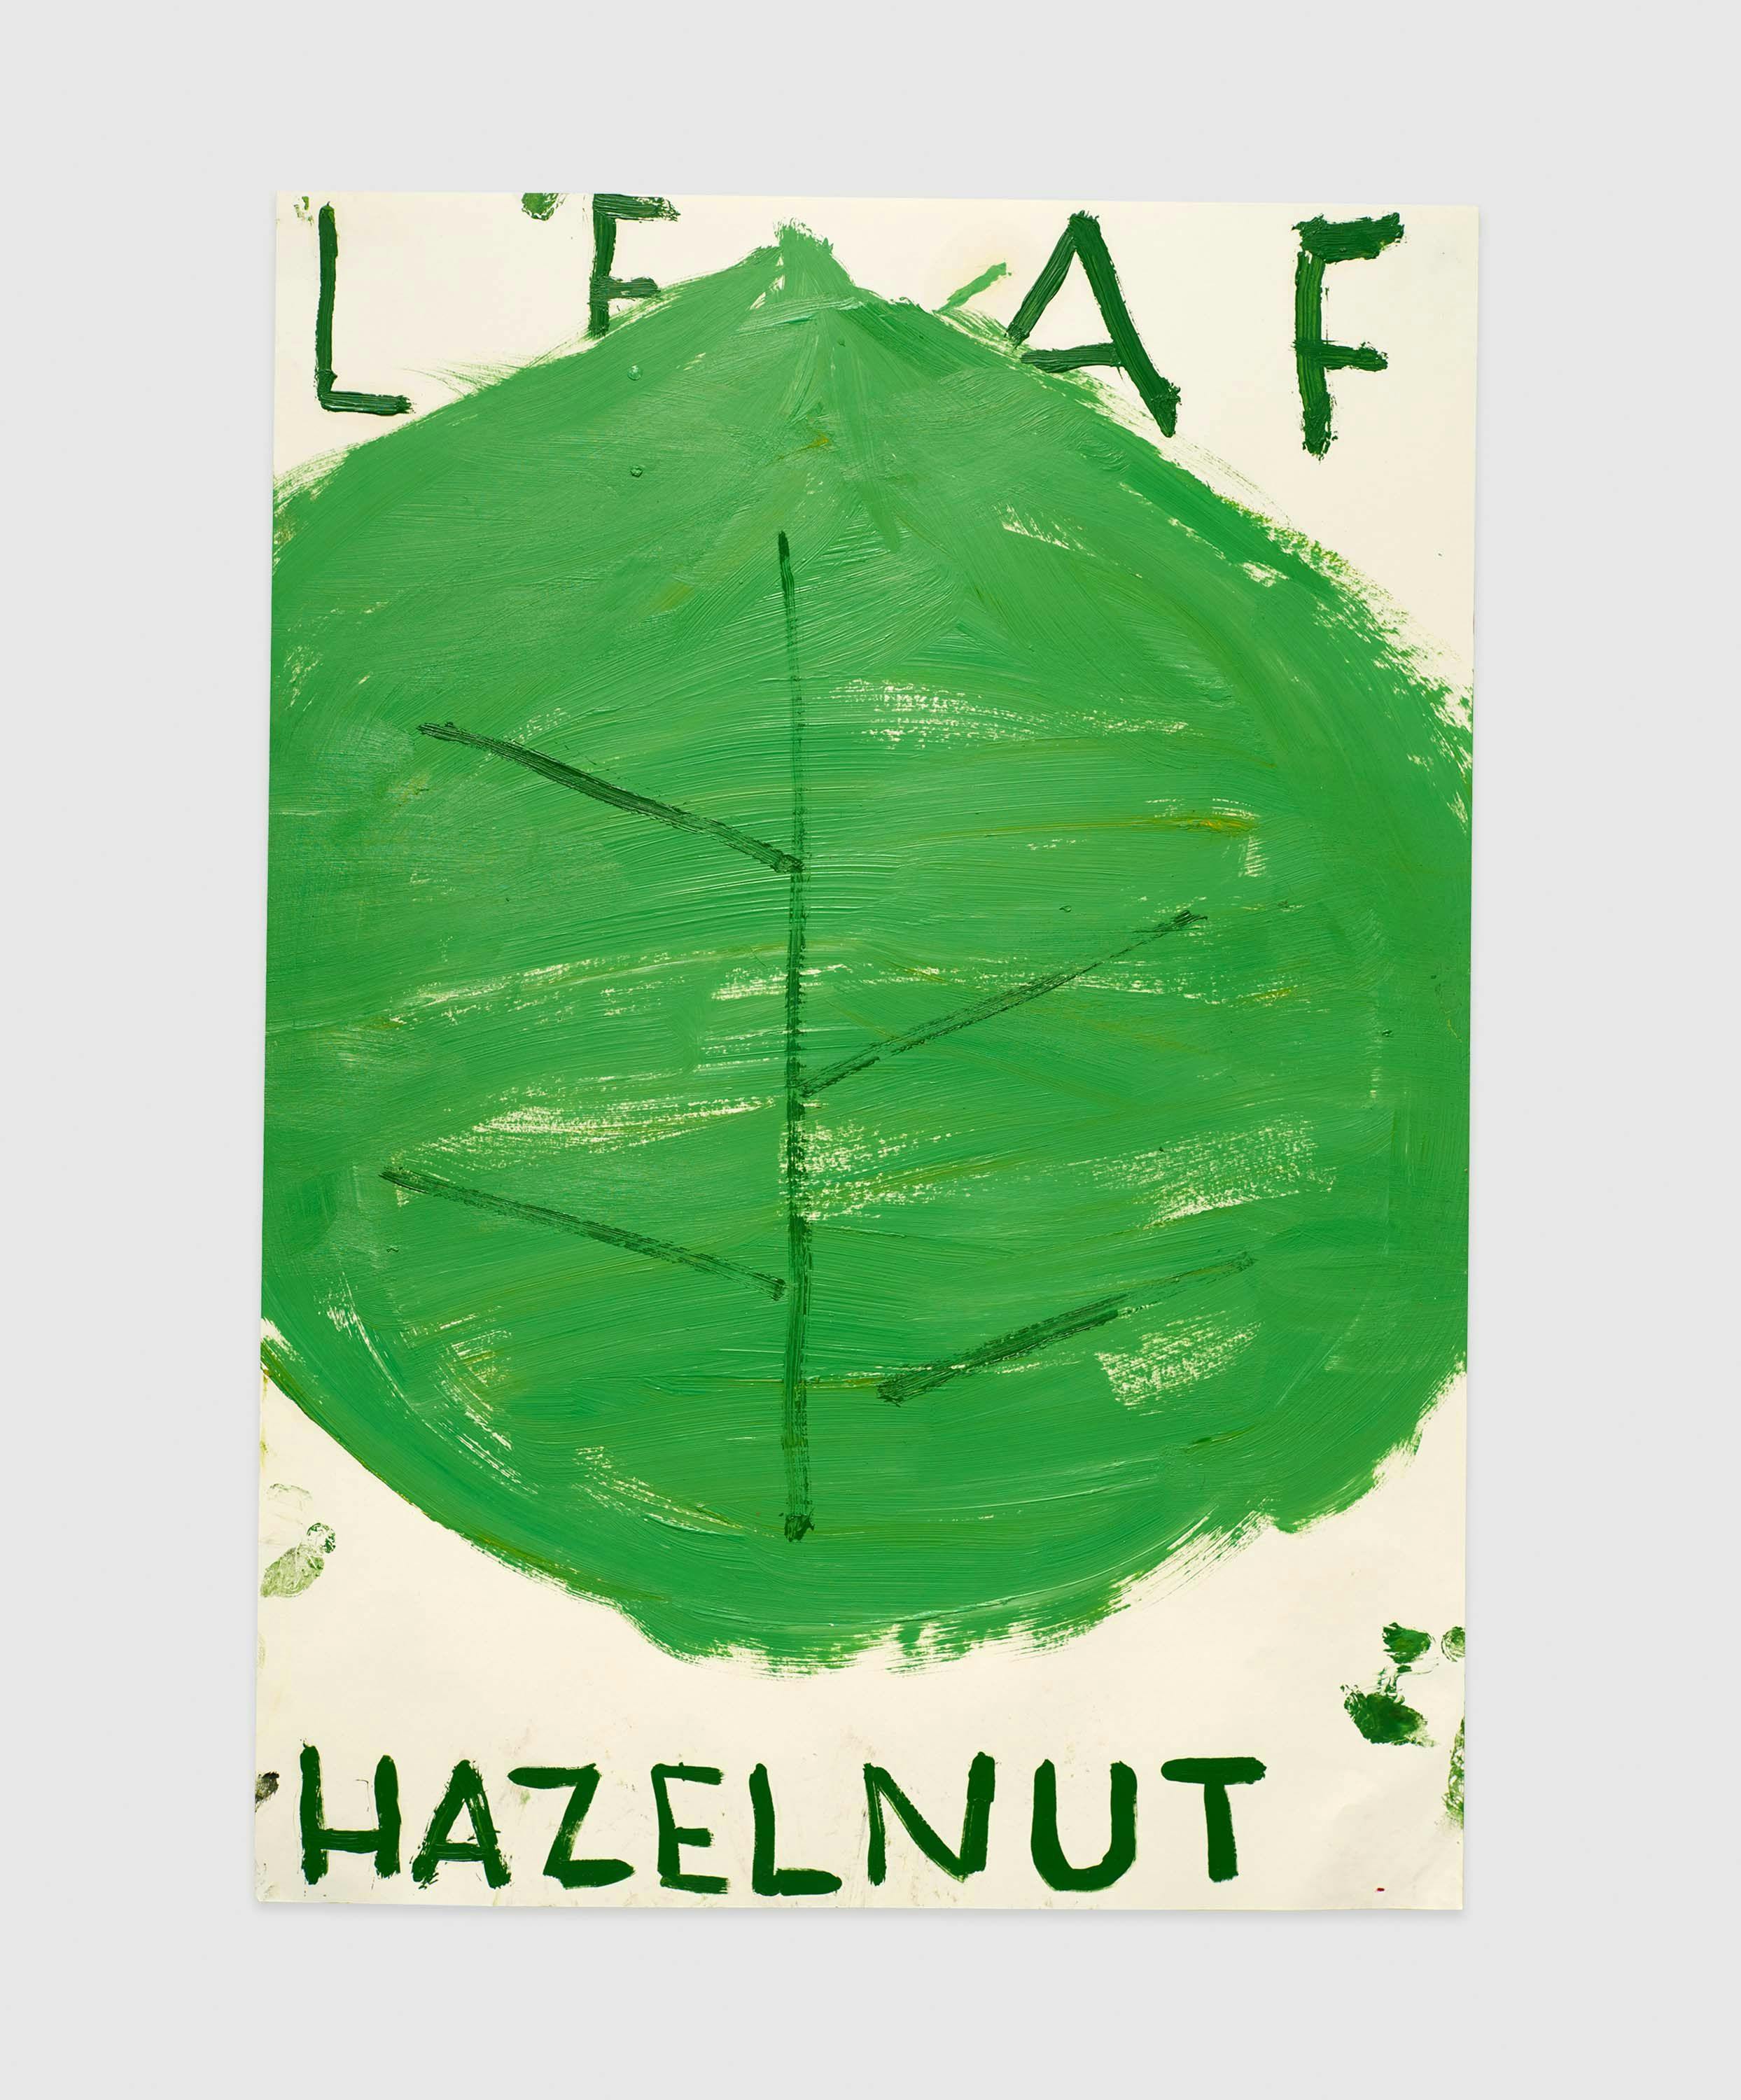 A work on paper by Rose Wylie, titled Hazelnut Leaf, dated 2015.